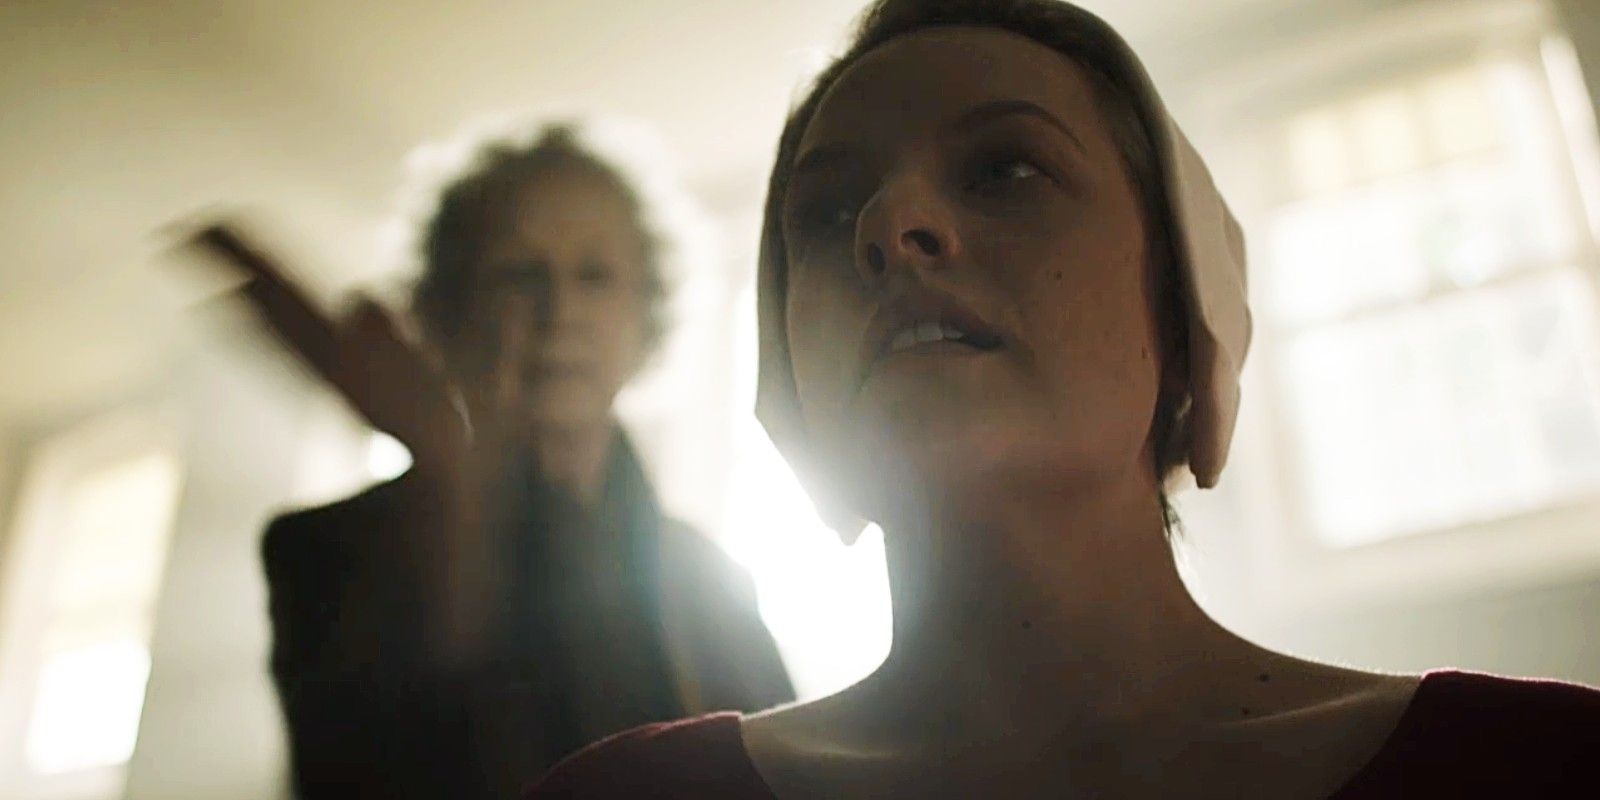 Margaret Atwood as Aunt Margaret and Elizabeth Moss as June Offred in The Handmaid's Tale S01E01